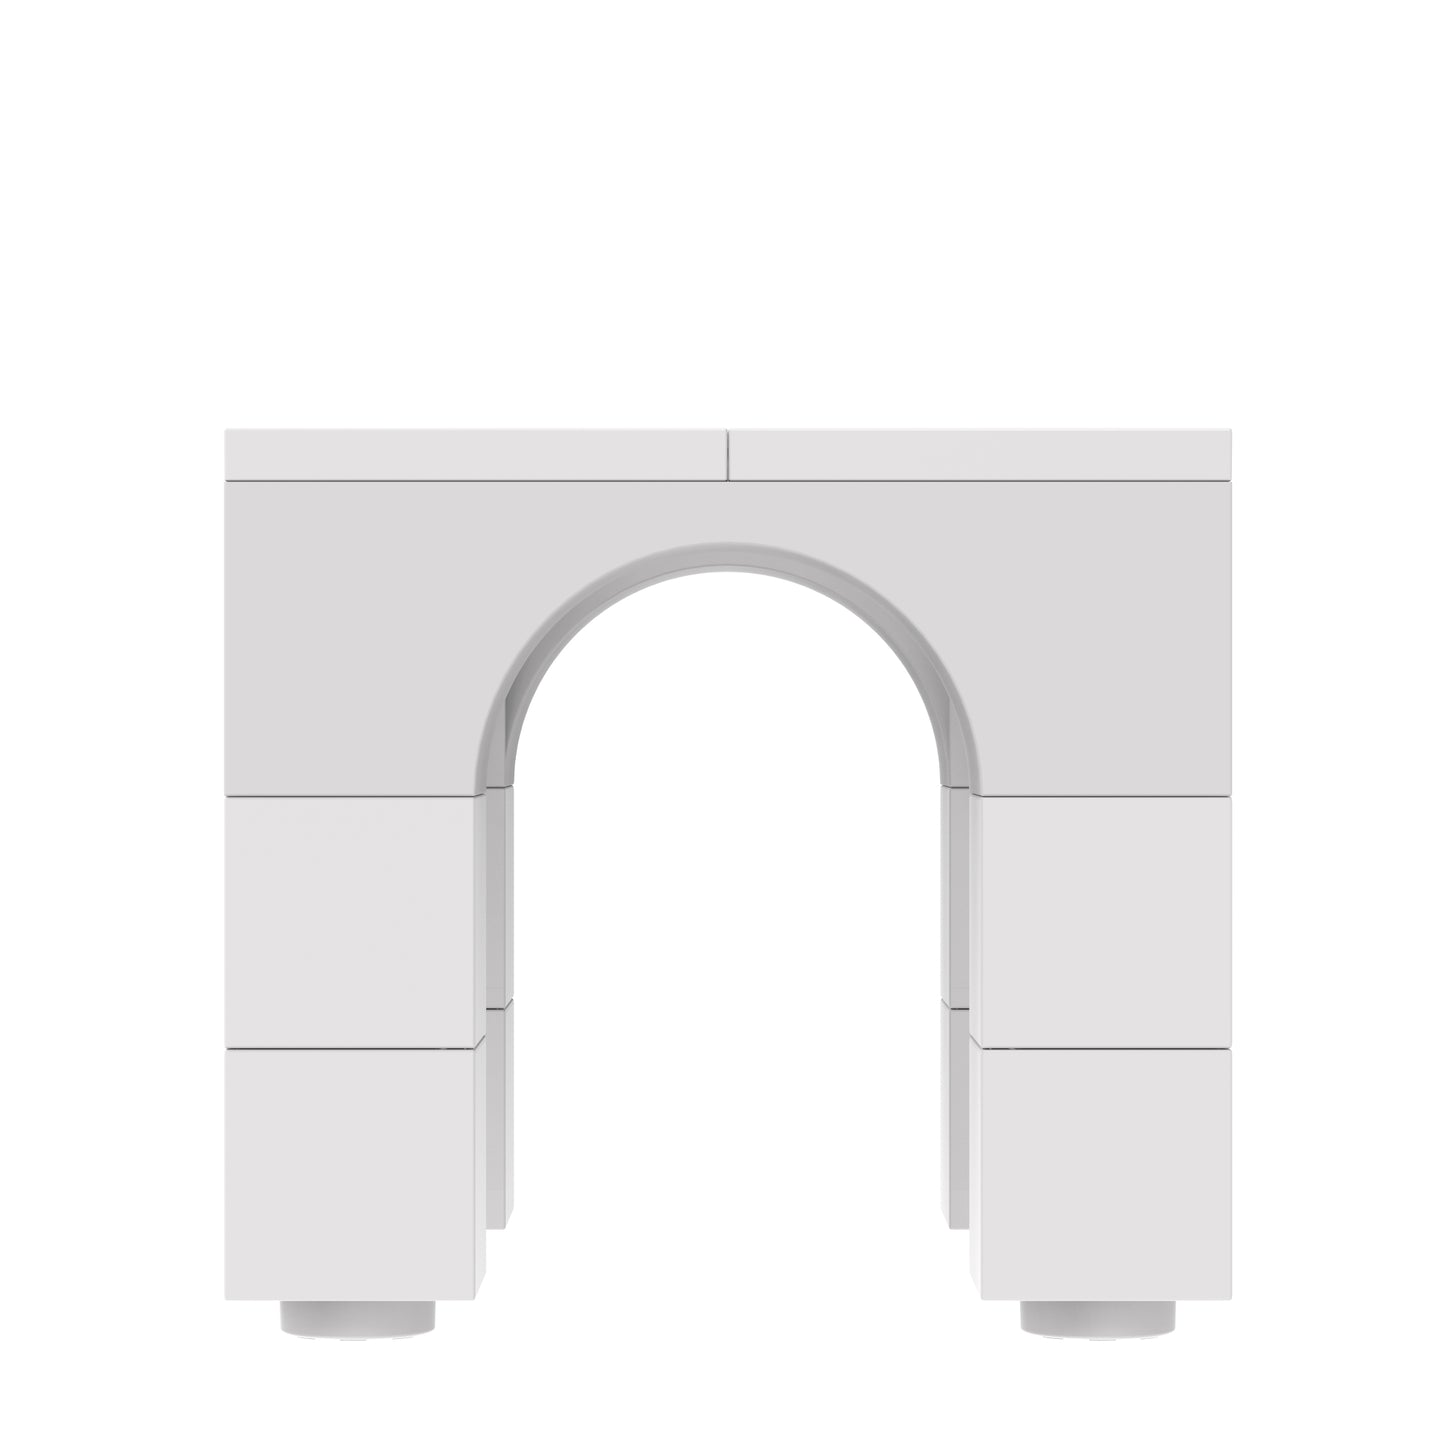 【3d printing parts 】Square round arch top